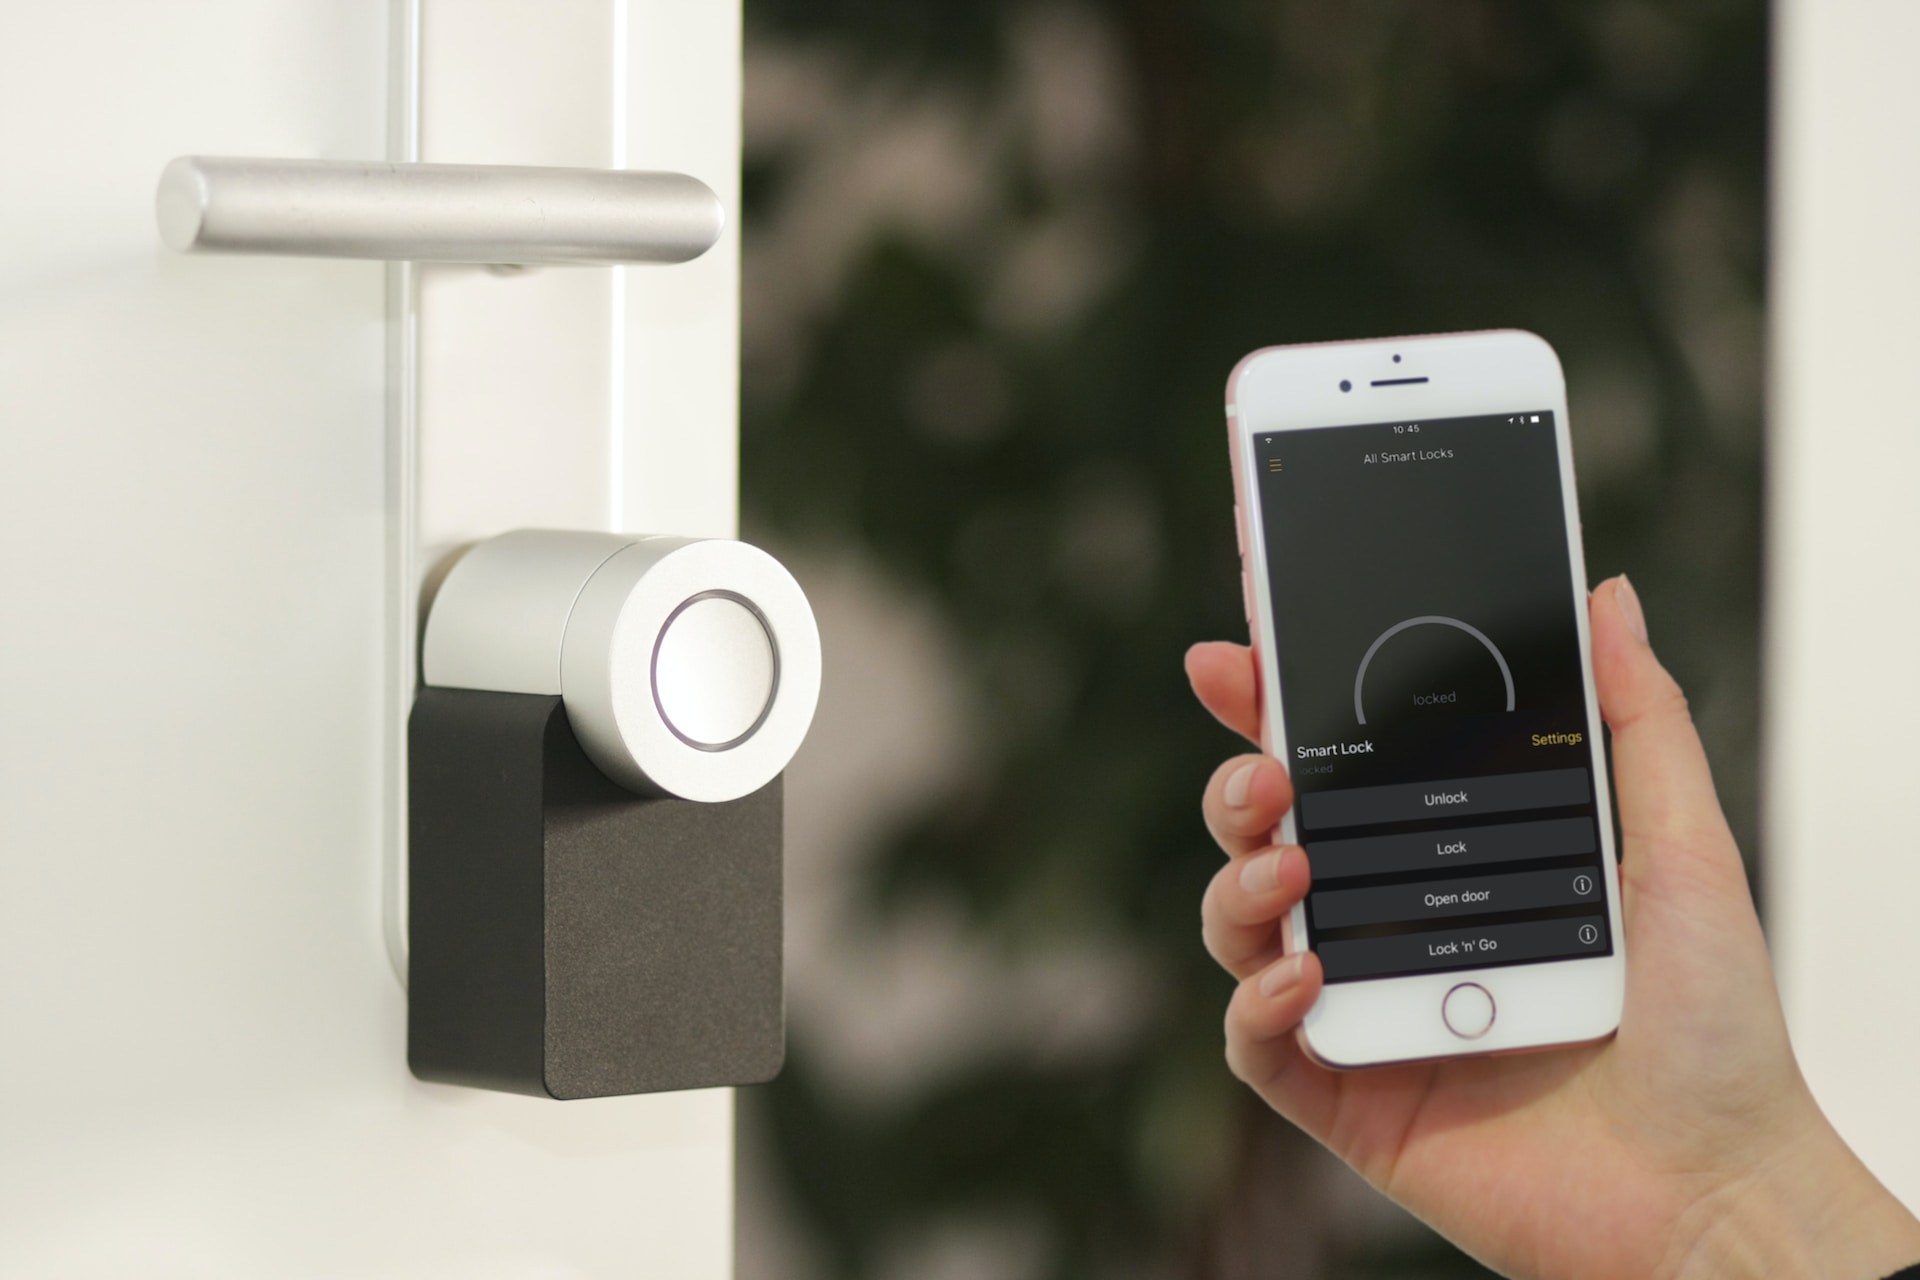 A smart home locking system that responds to your smartphone